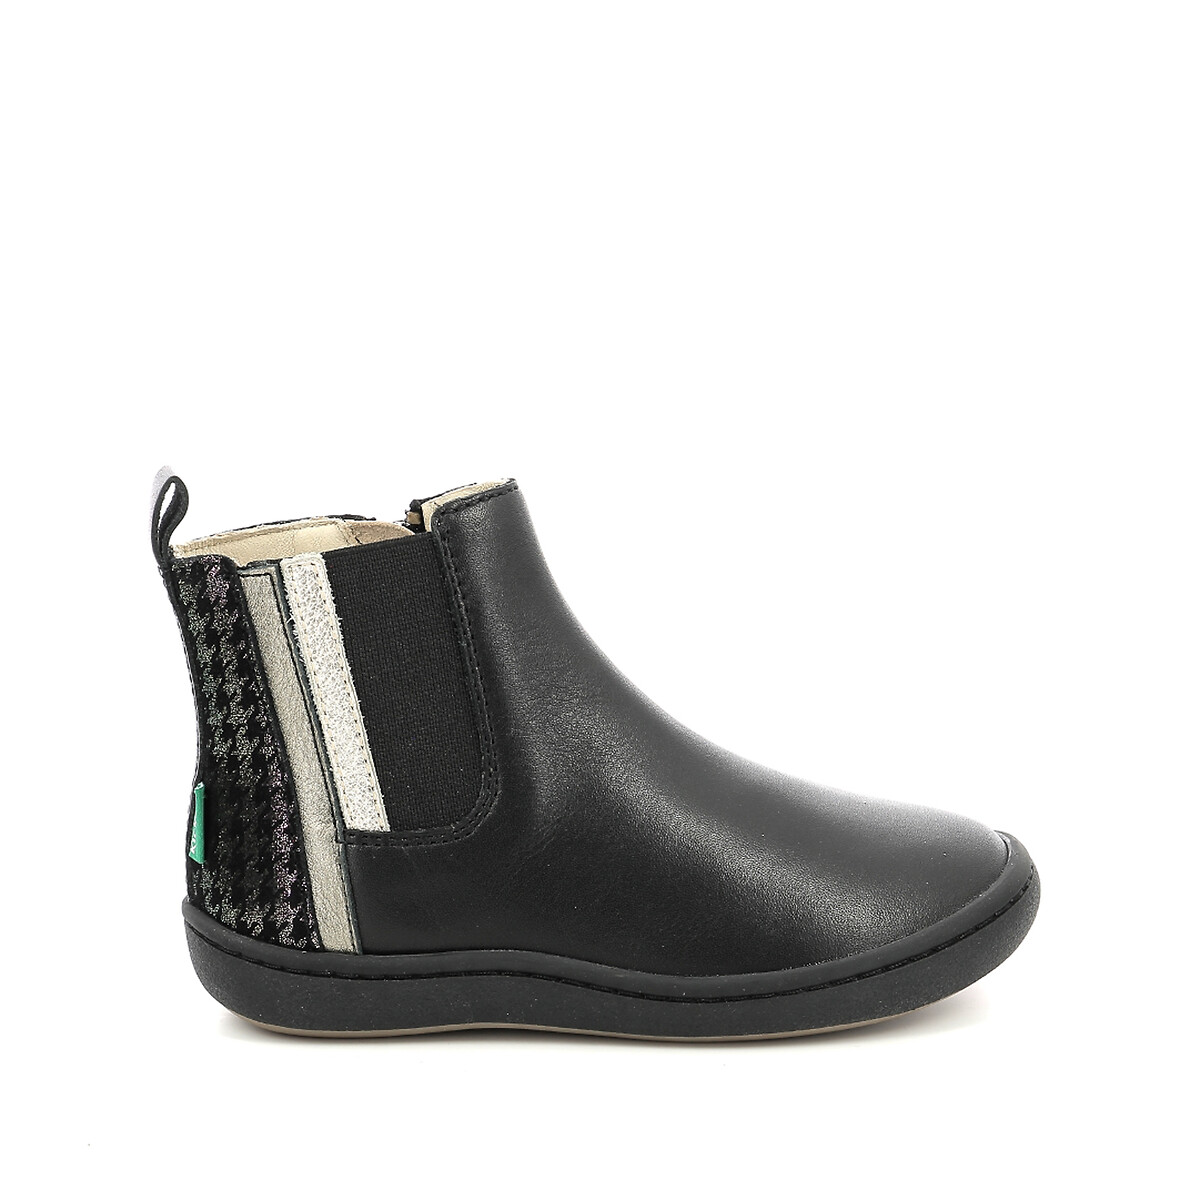 Kids Kickpolina Ankle Boots in Leather